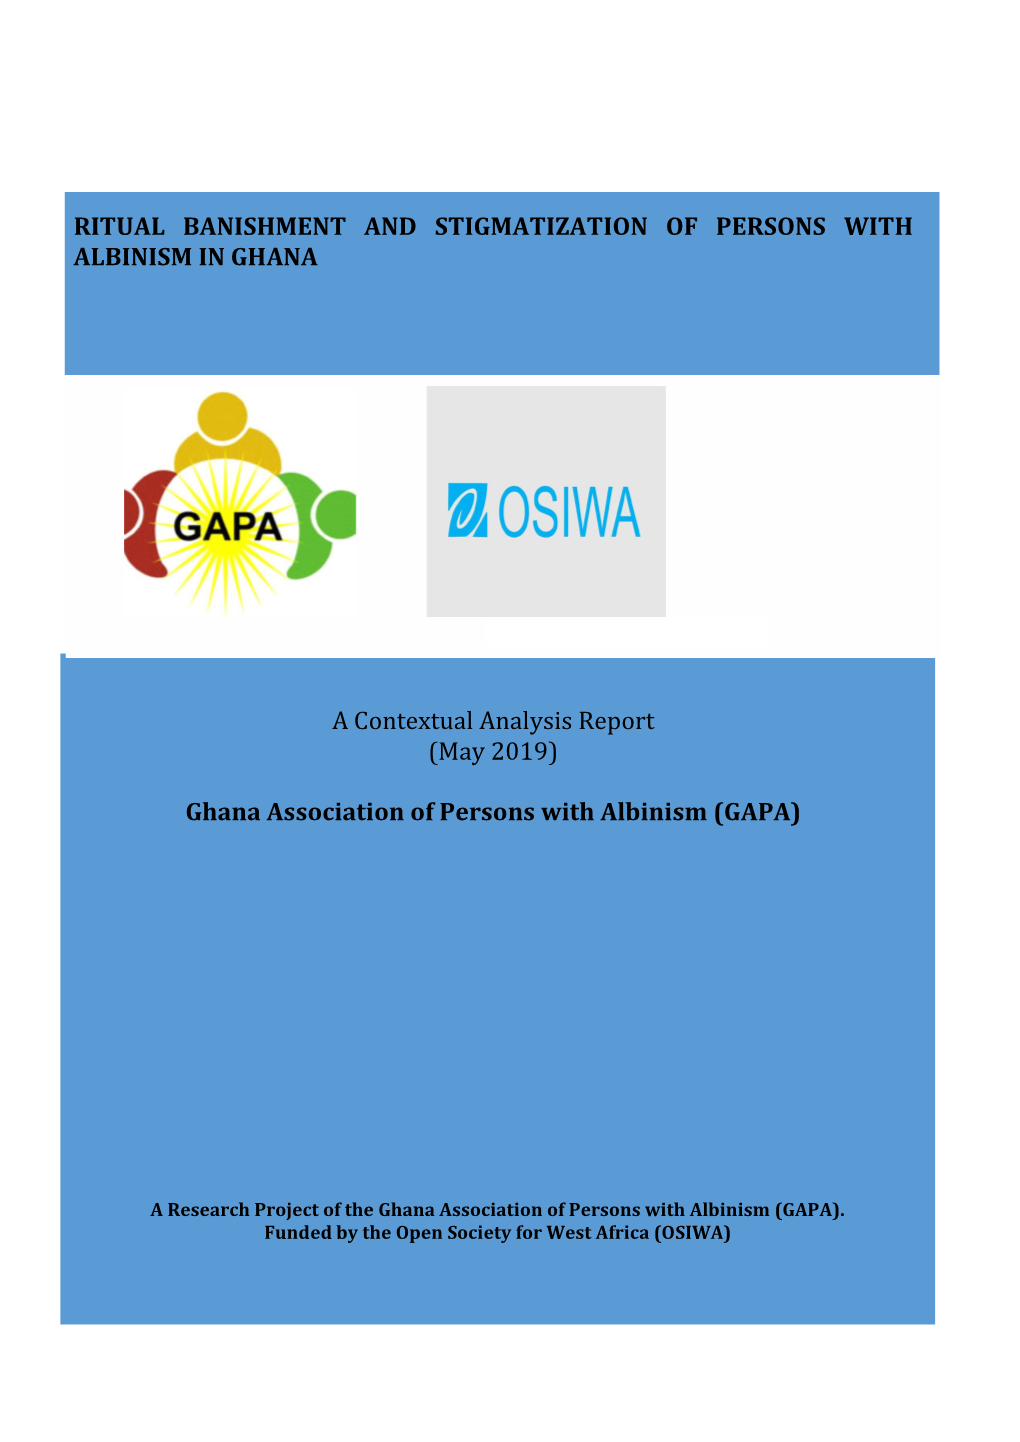 Ghana Association of Persons with Albinism (GAPA)